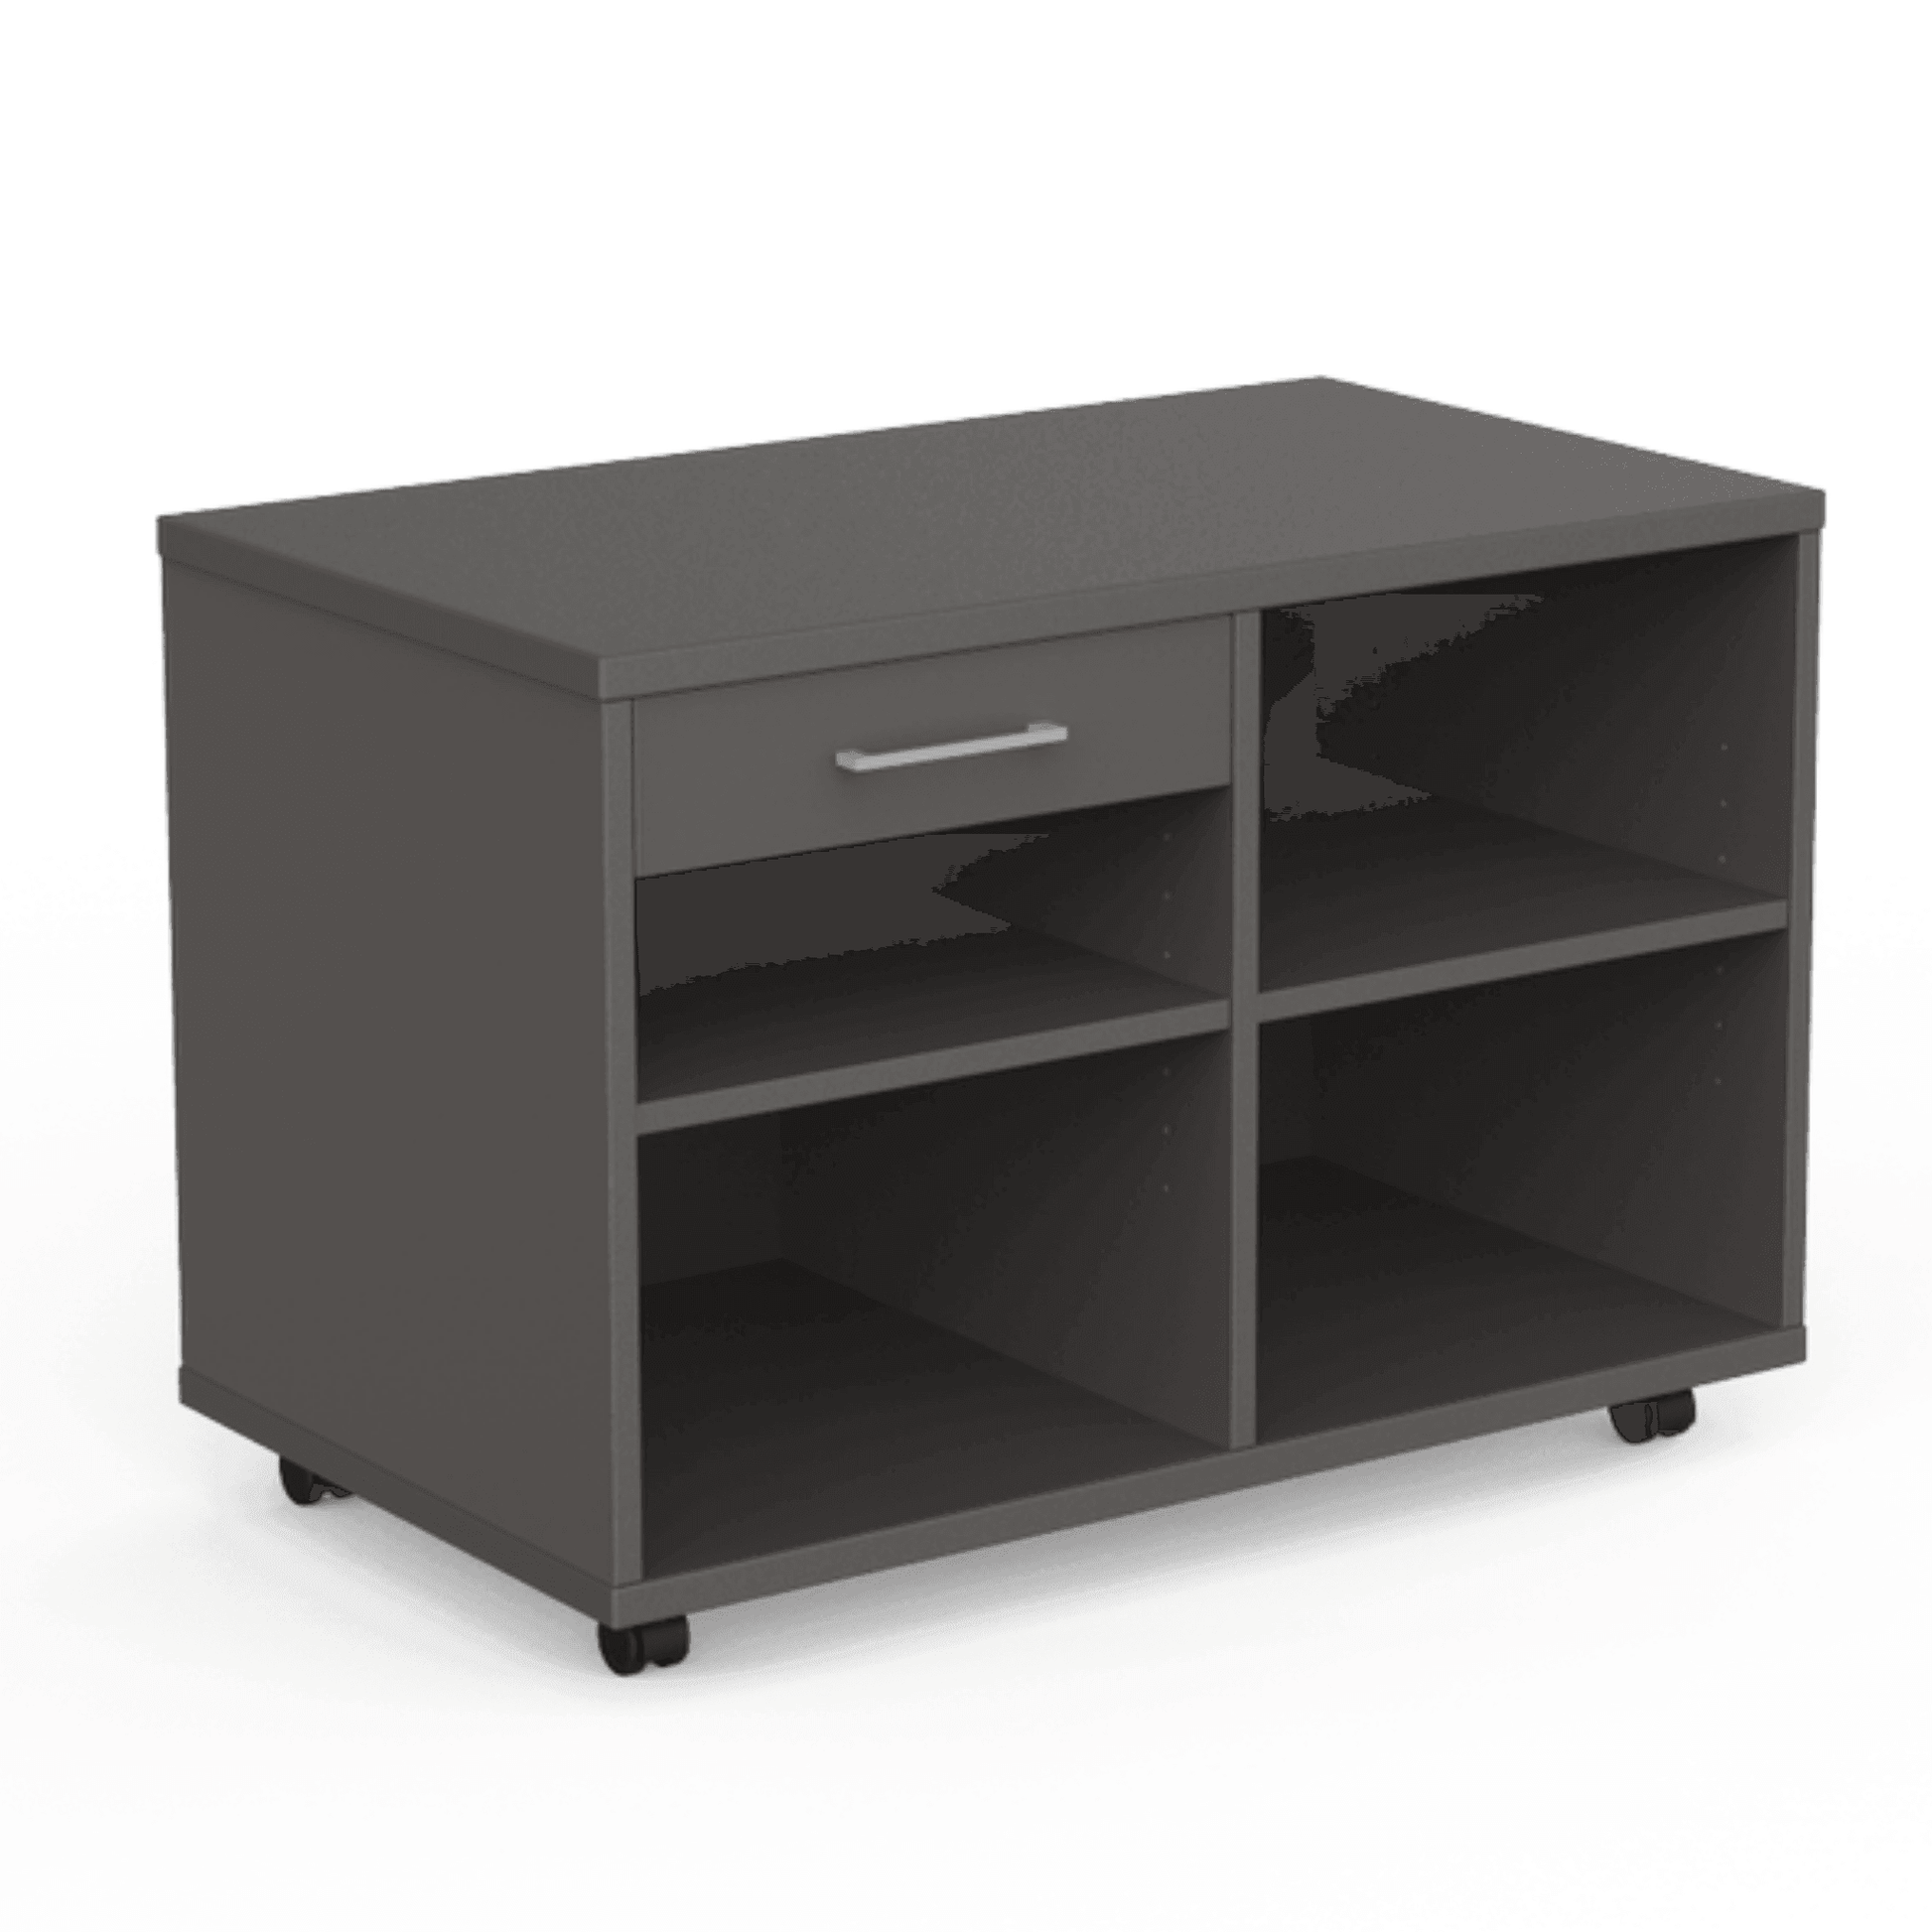 EkoSystem Mobile Book Case Caddy with Drawer Add-On - Office Furniture Company 